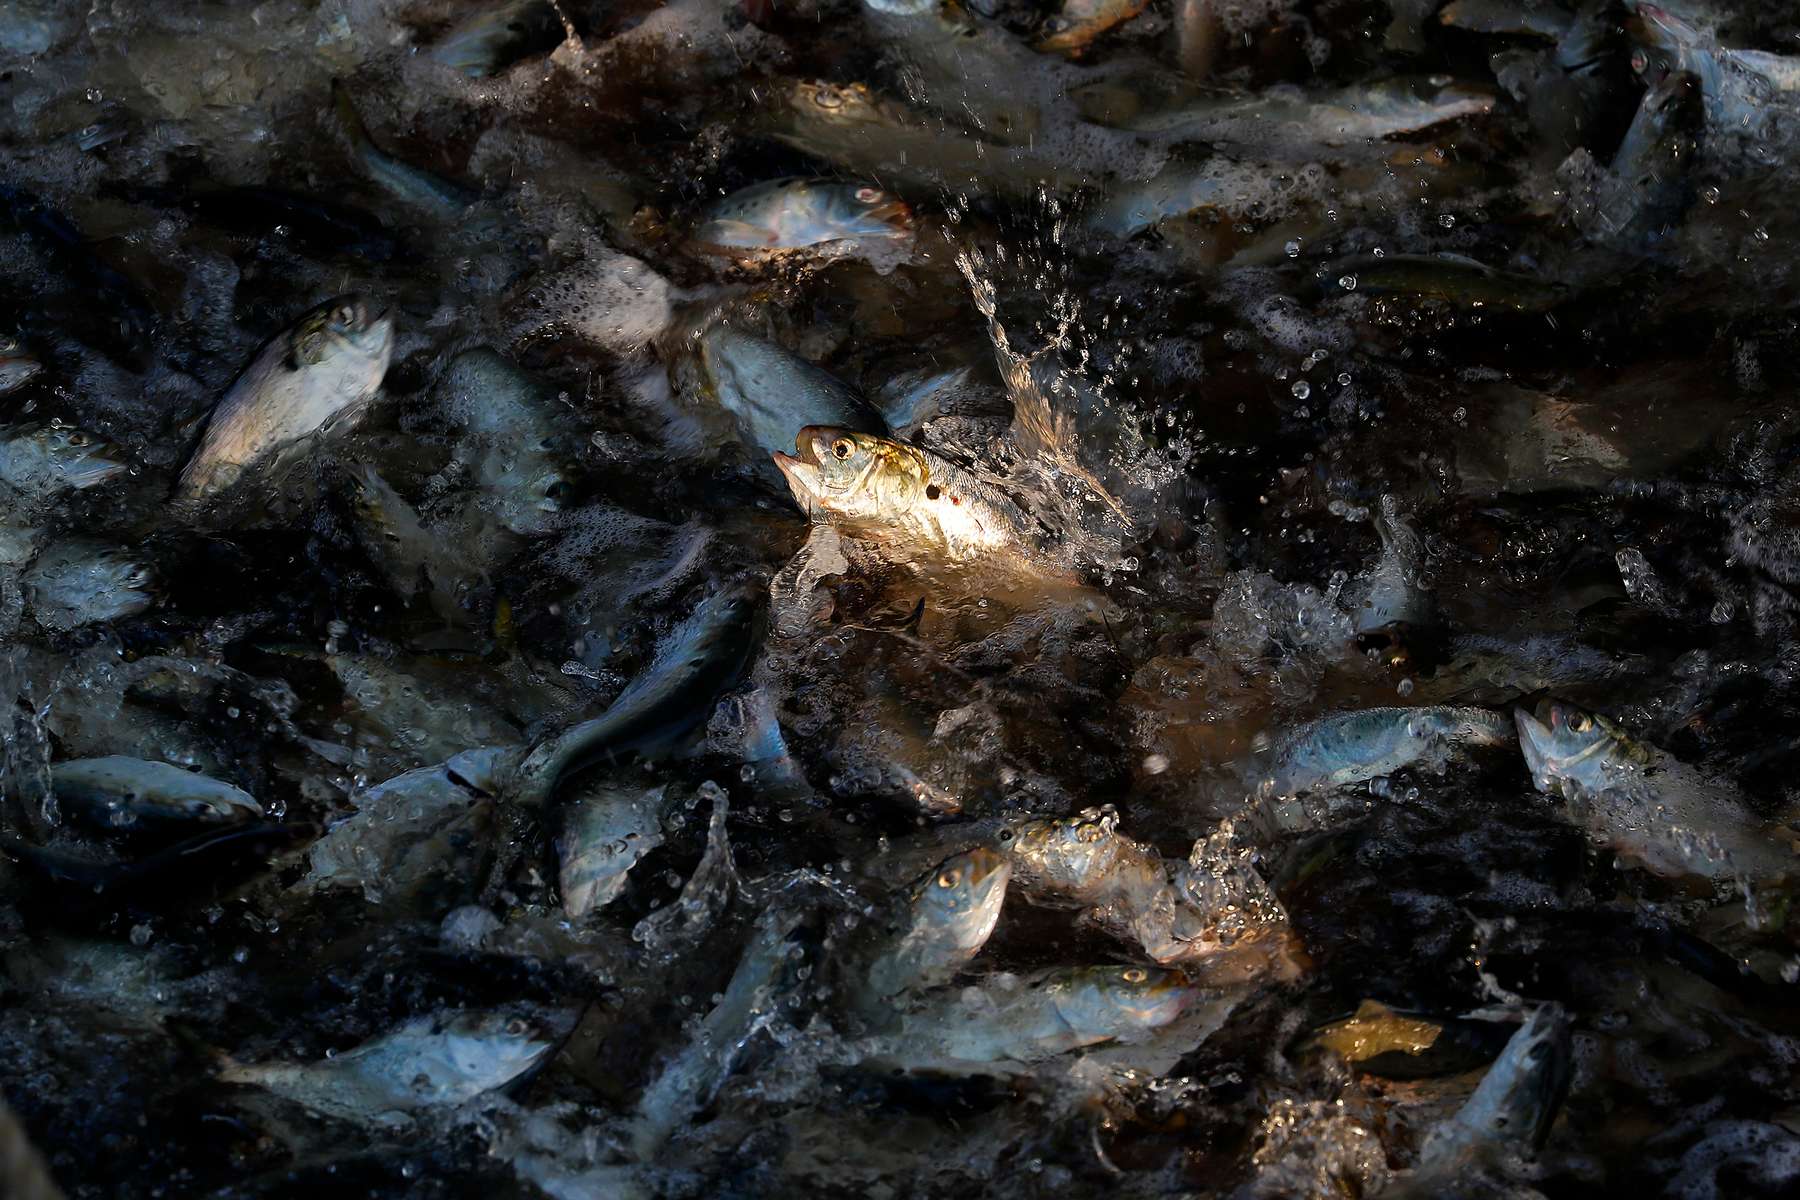 Menhaden jump from the water as fishermen of the Cockrells Creek begin to raise a seine net Tuesday morning September 3, 2019. The 15 fishermen of the 185-foot long Cockrells Creek are part of the Omega Proteins fleet that fish for menhaden in the Chesapeake Bay and Atlantic Ocean. The oil of menhaden is full of omega-3 fatty acids that makes them a valuable source of nutritional supplements, and at Omega’s plant in Reedville the fish are processed for fish oil and fishmeal. 